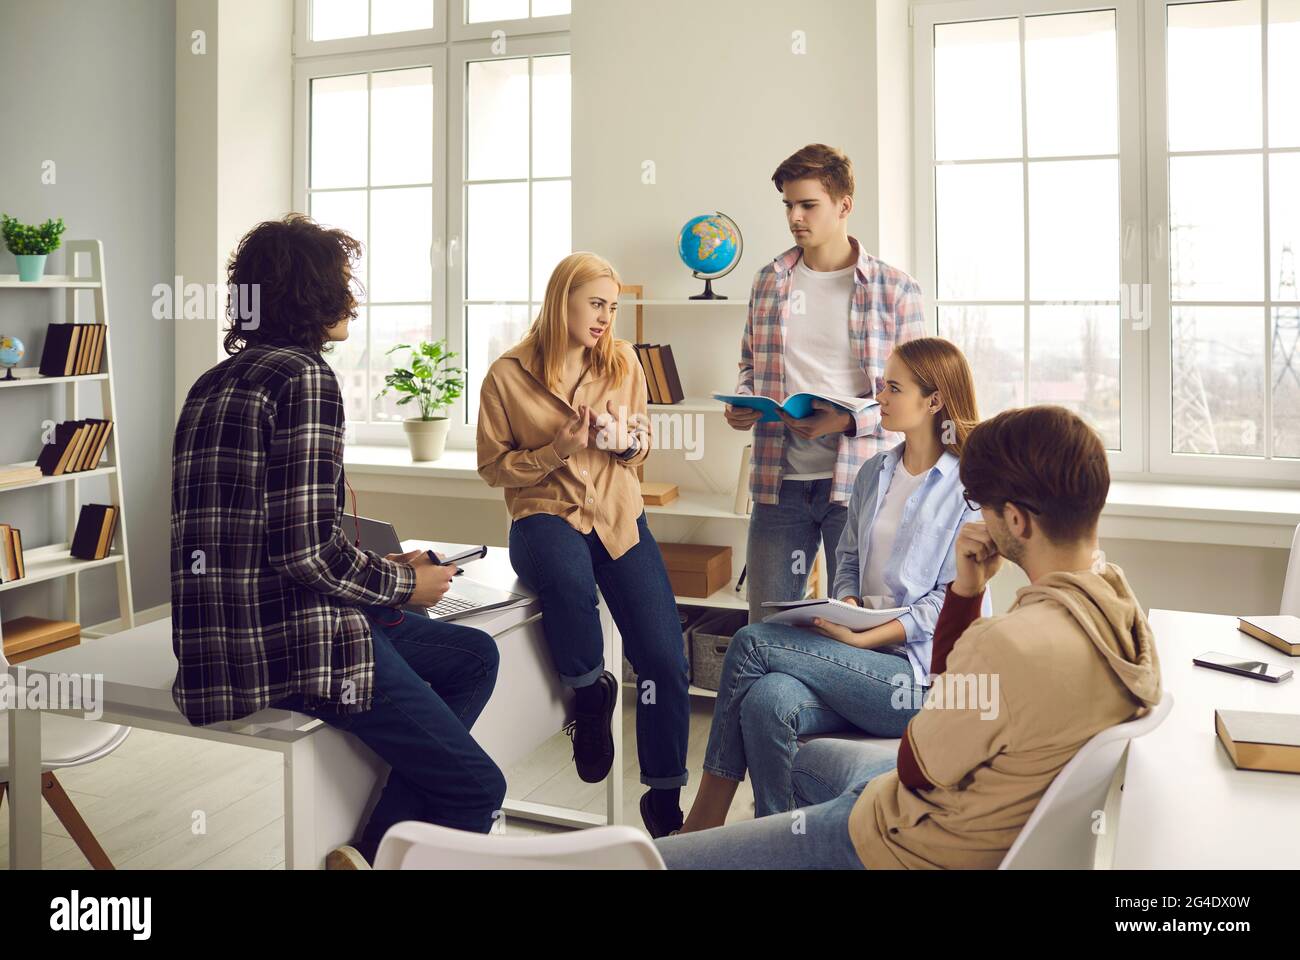 Teenage diverse classmates group talking sharing knowledge in classroom Stock Photo